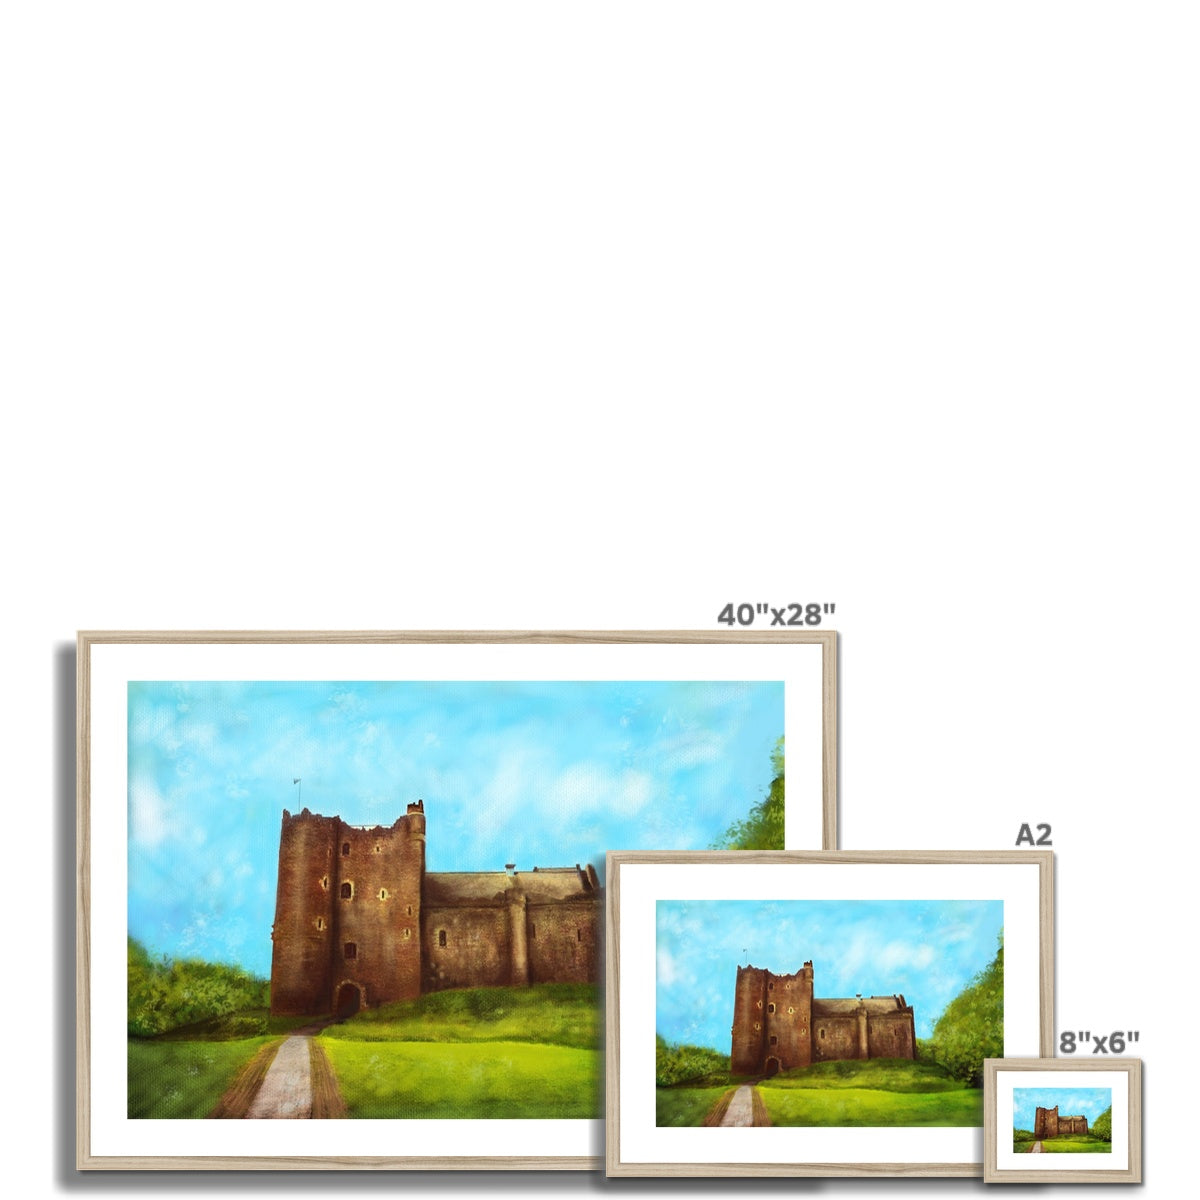 Doune Castle Painting | Framed & Mounted Prints From Scotland-Framed & Mounted Prints-Historic & Iconic Scotland Art Gallery-Paintings, Prints, Homeware, Art Gifts From Scotland By Scottish Artist Kevin Hunter